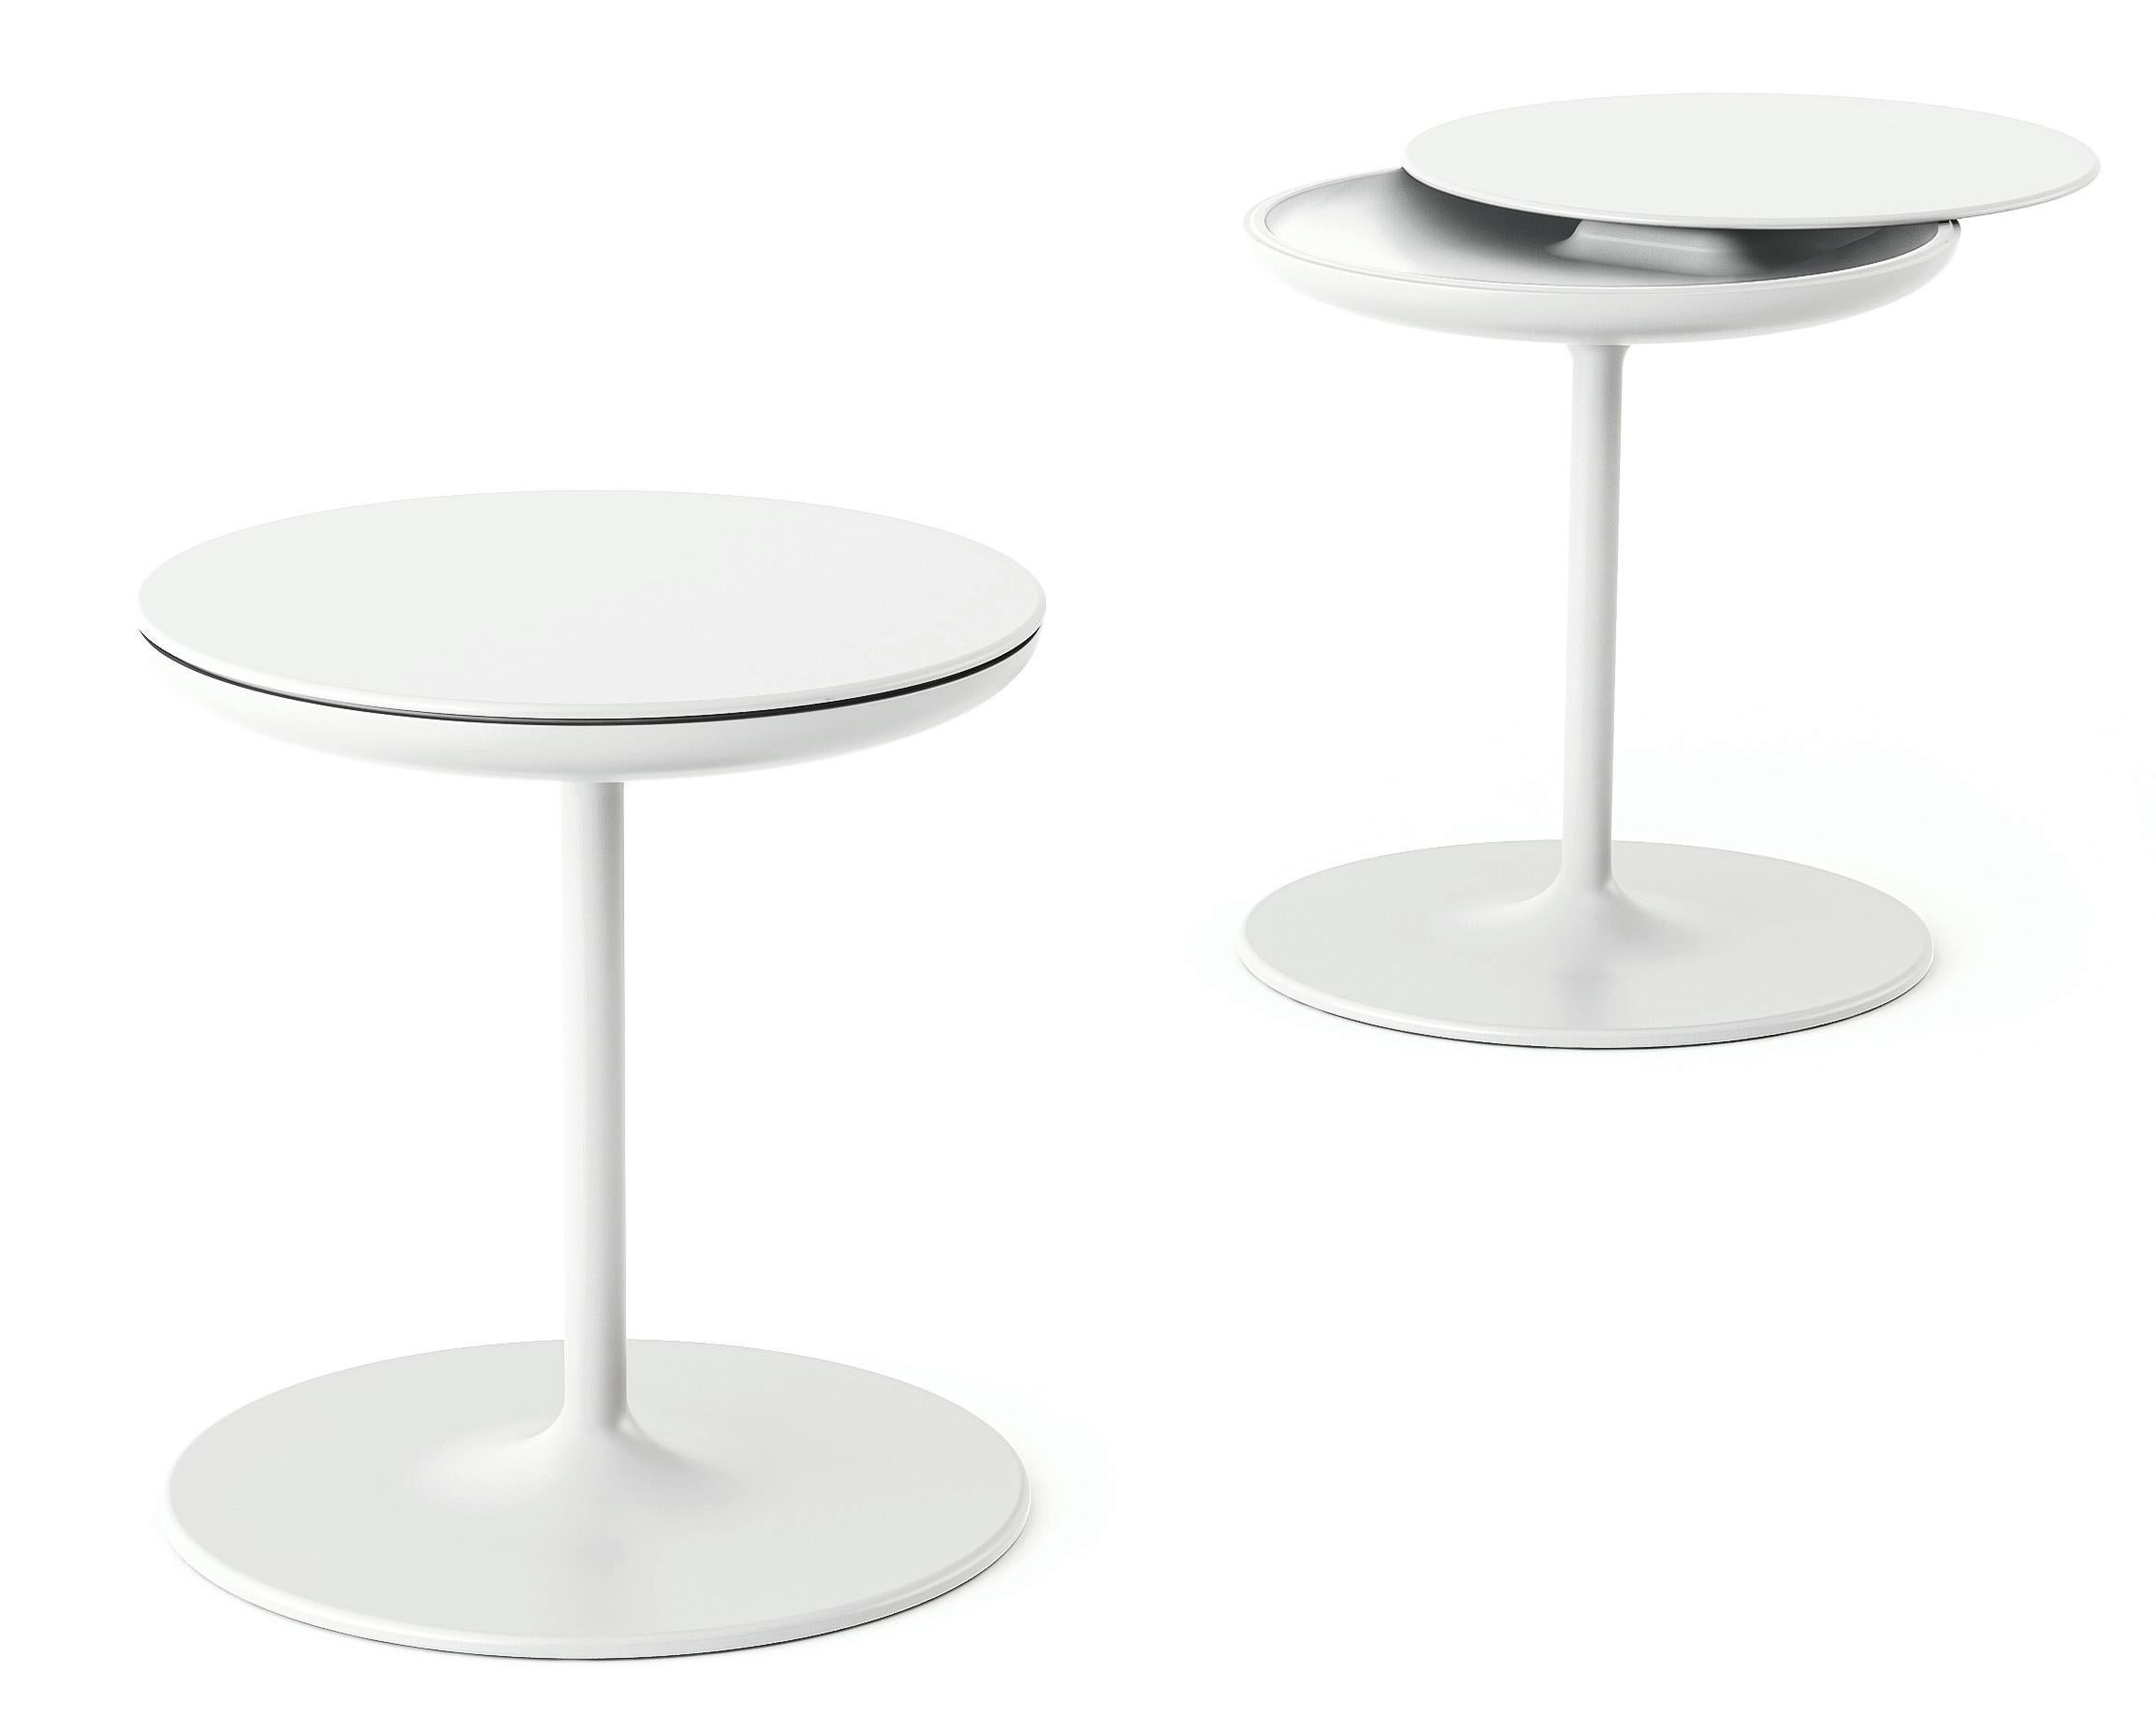 Zanotta Toi Small Table in White Finish with Plywood Top by Salvatore Indriolo

Stiff polyurethane frame. Aluminum-covered plywood top. Varnish in black, white or red. Organizer compartment revealed by rotating table top 360°.

An authentic